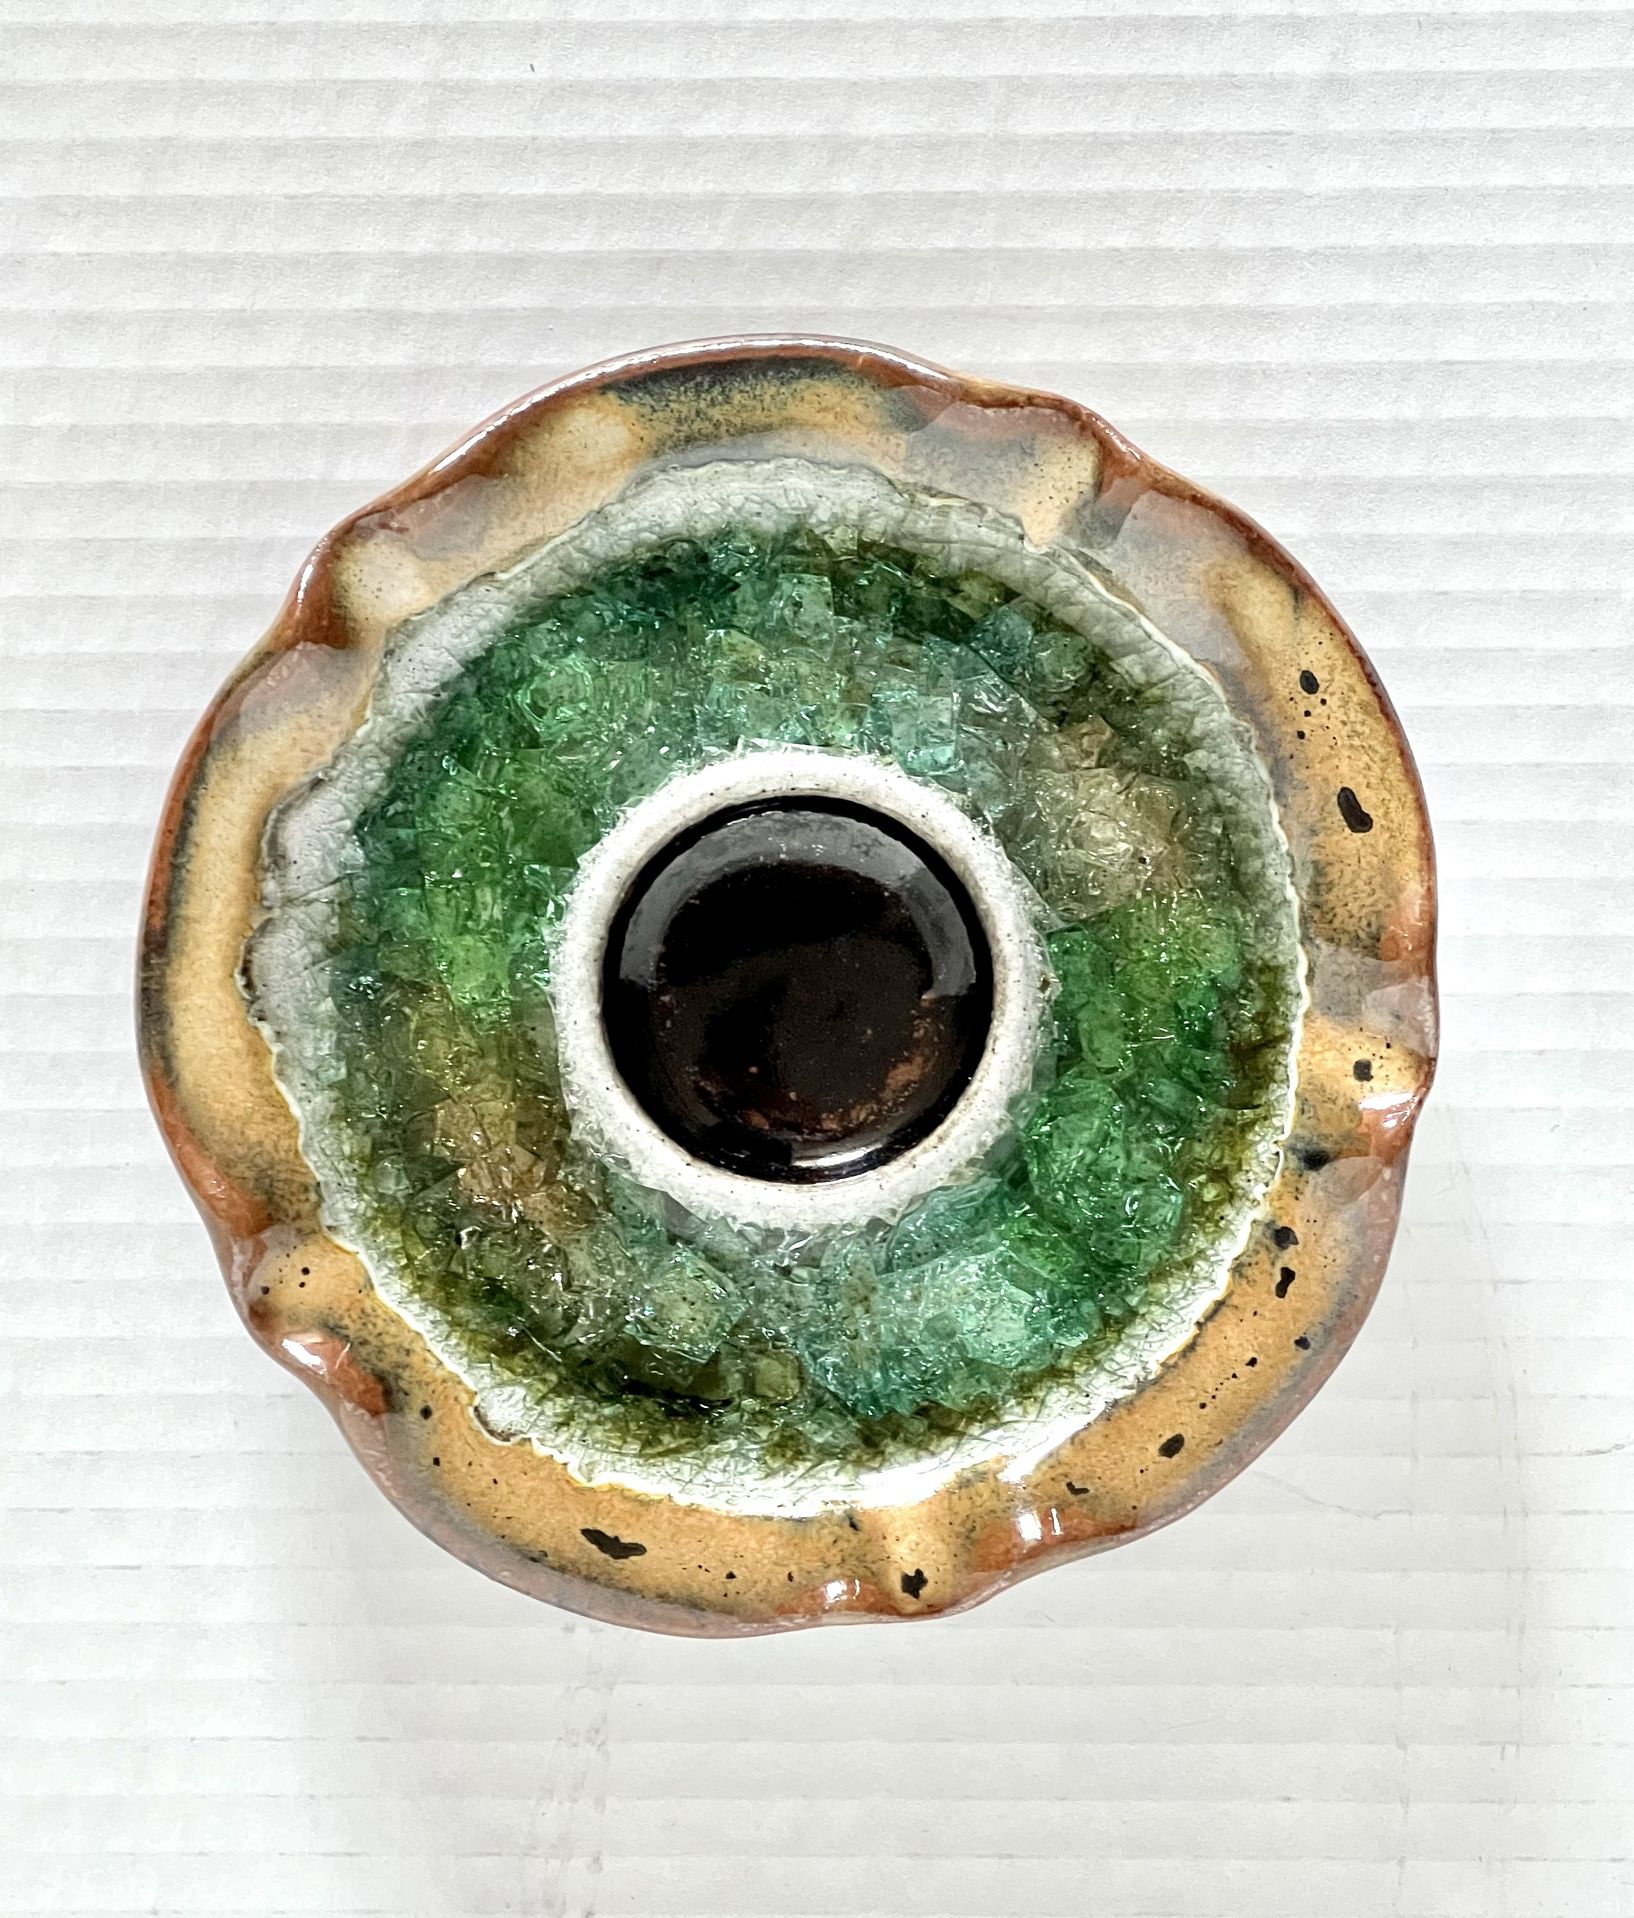 Green Brown Ceramic Infused Crackled Glass Pottery Trinket Dish Ashtray, Candle Holder 